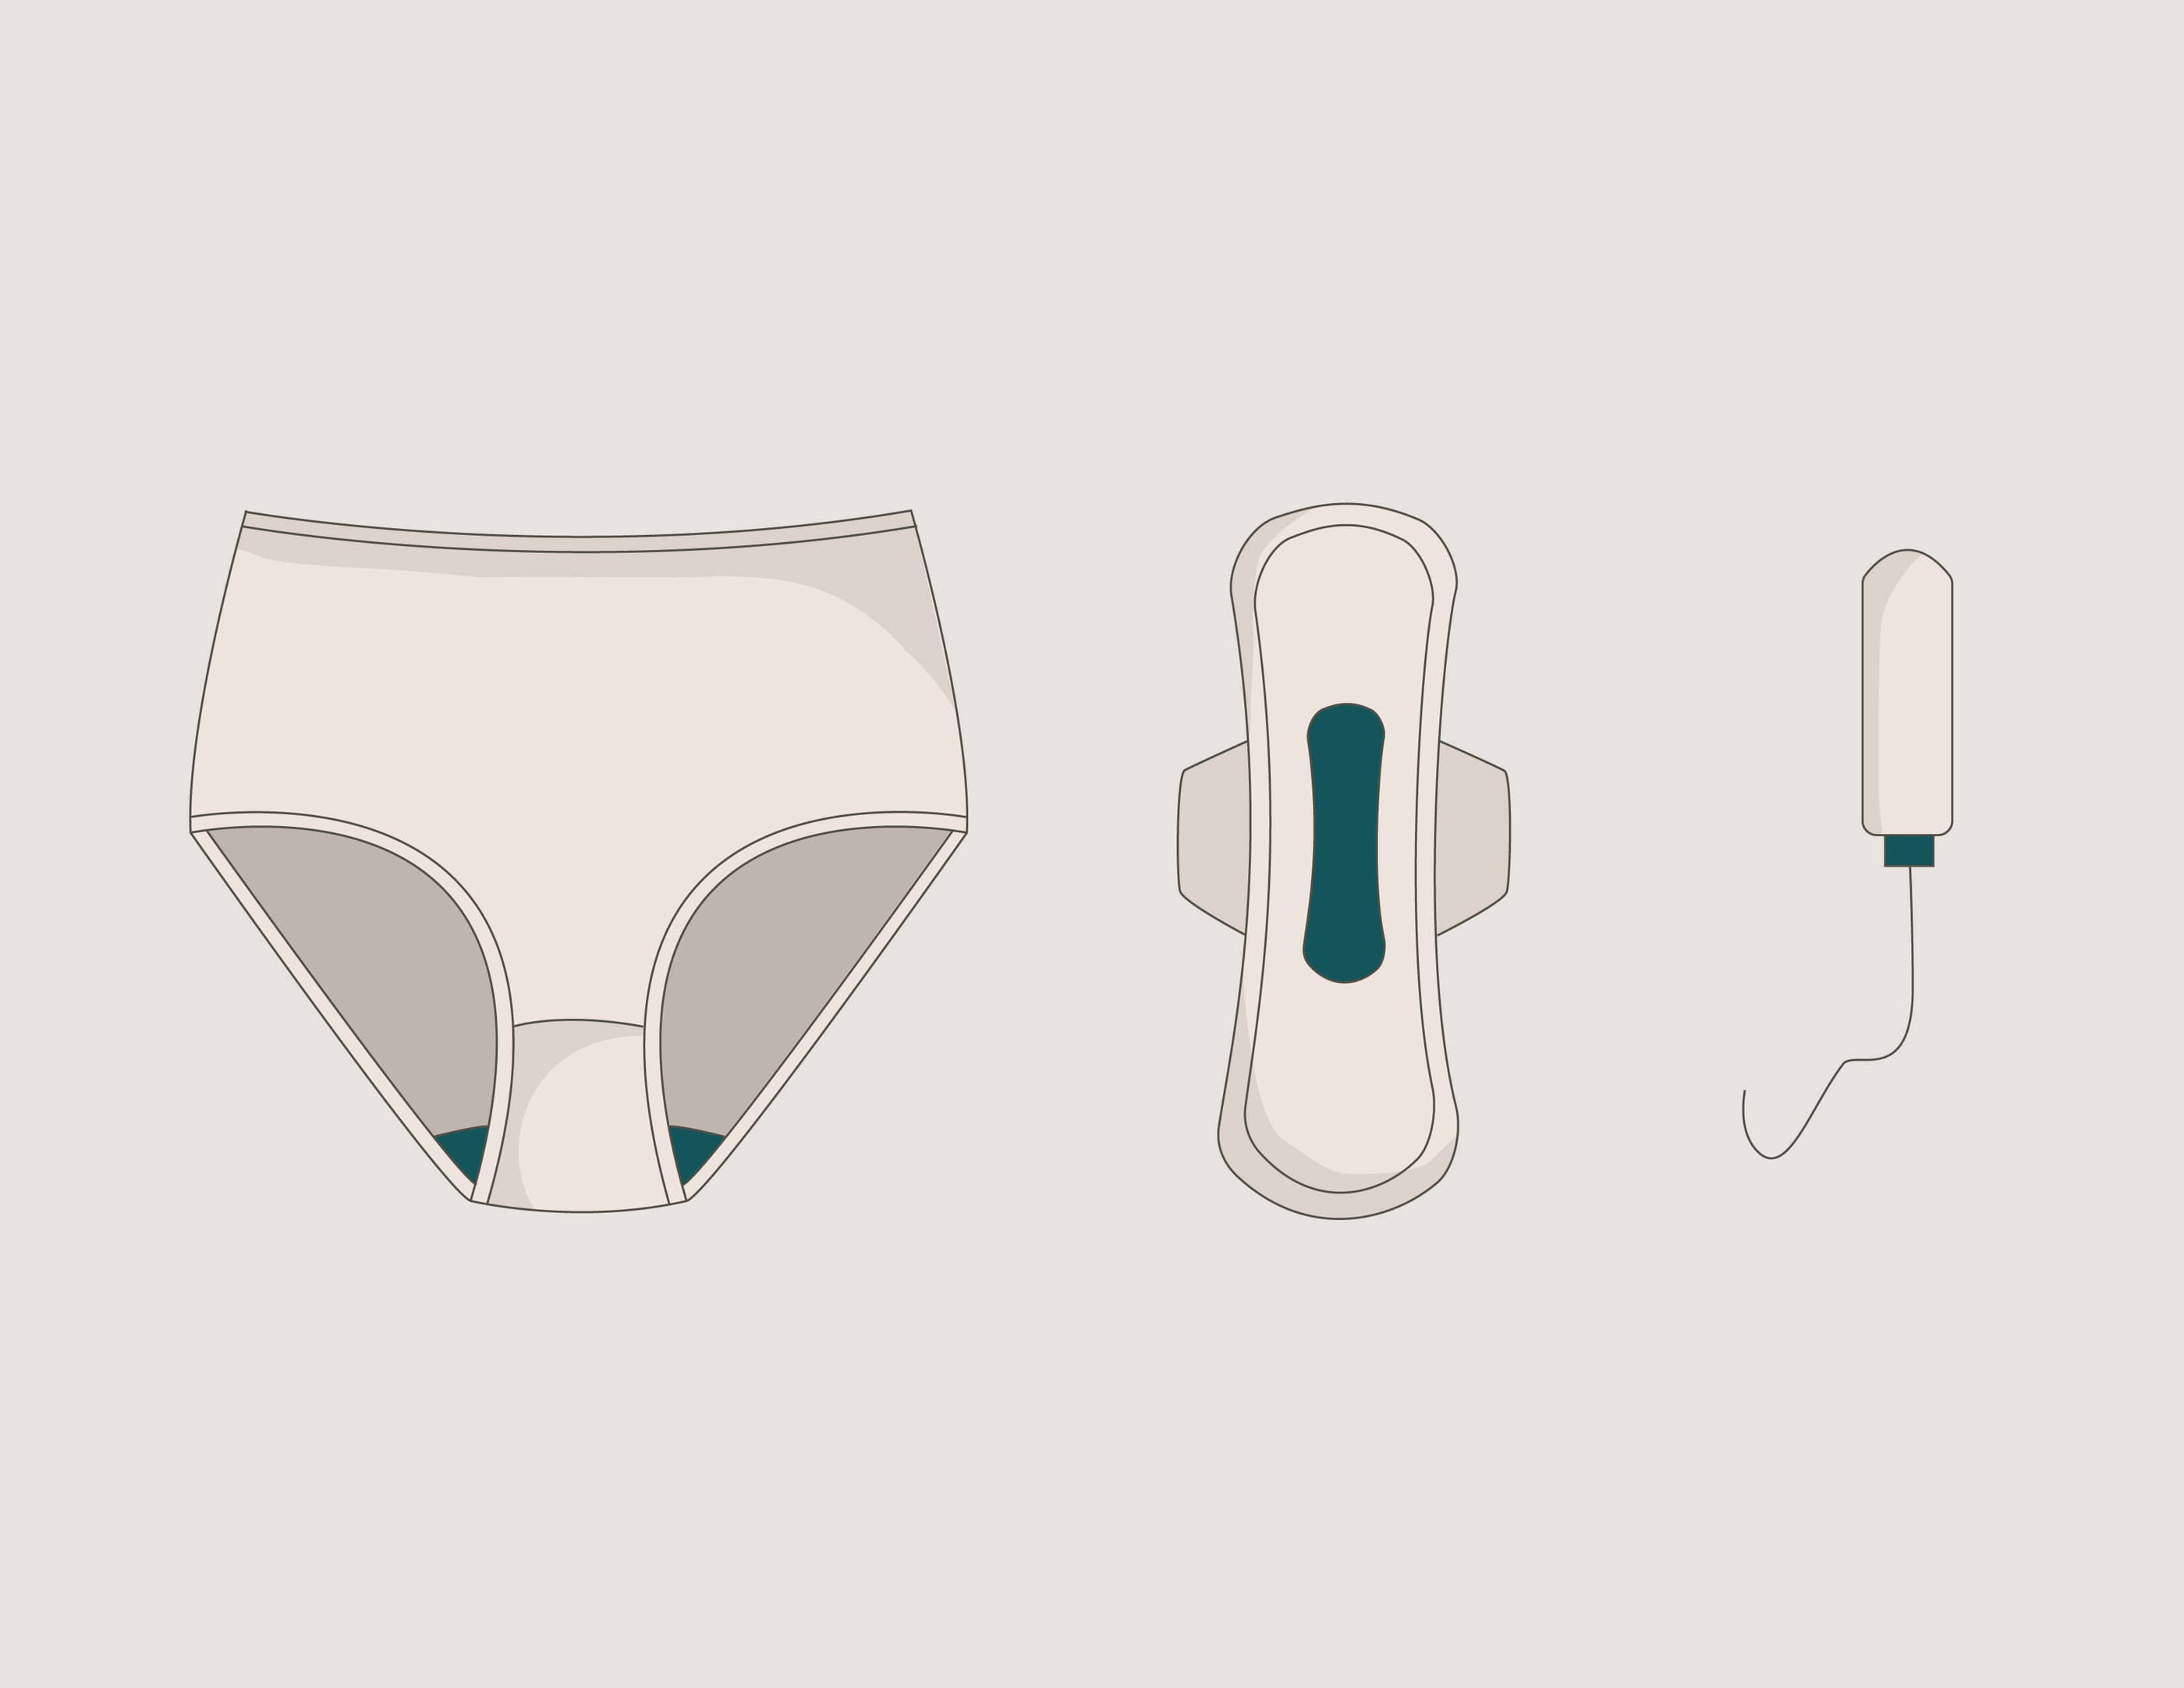 How do Period Panties Work and Are They Good?